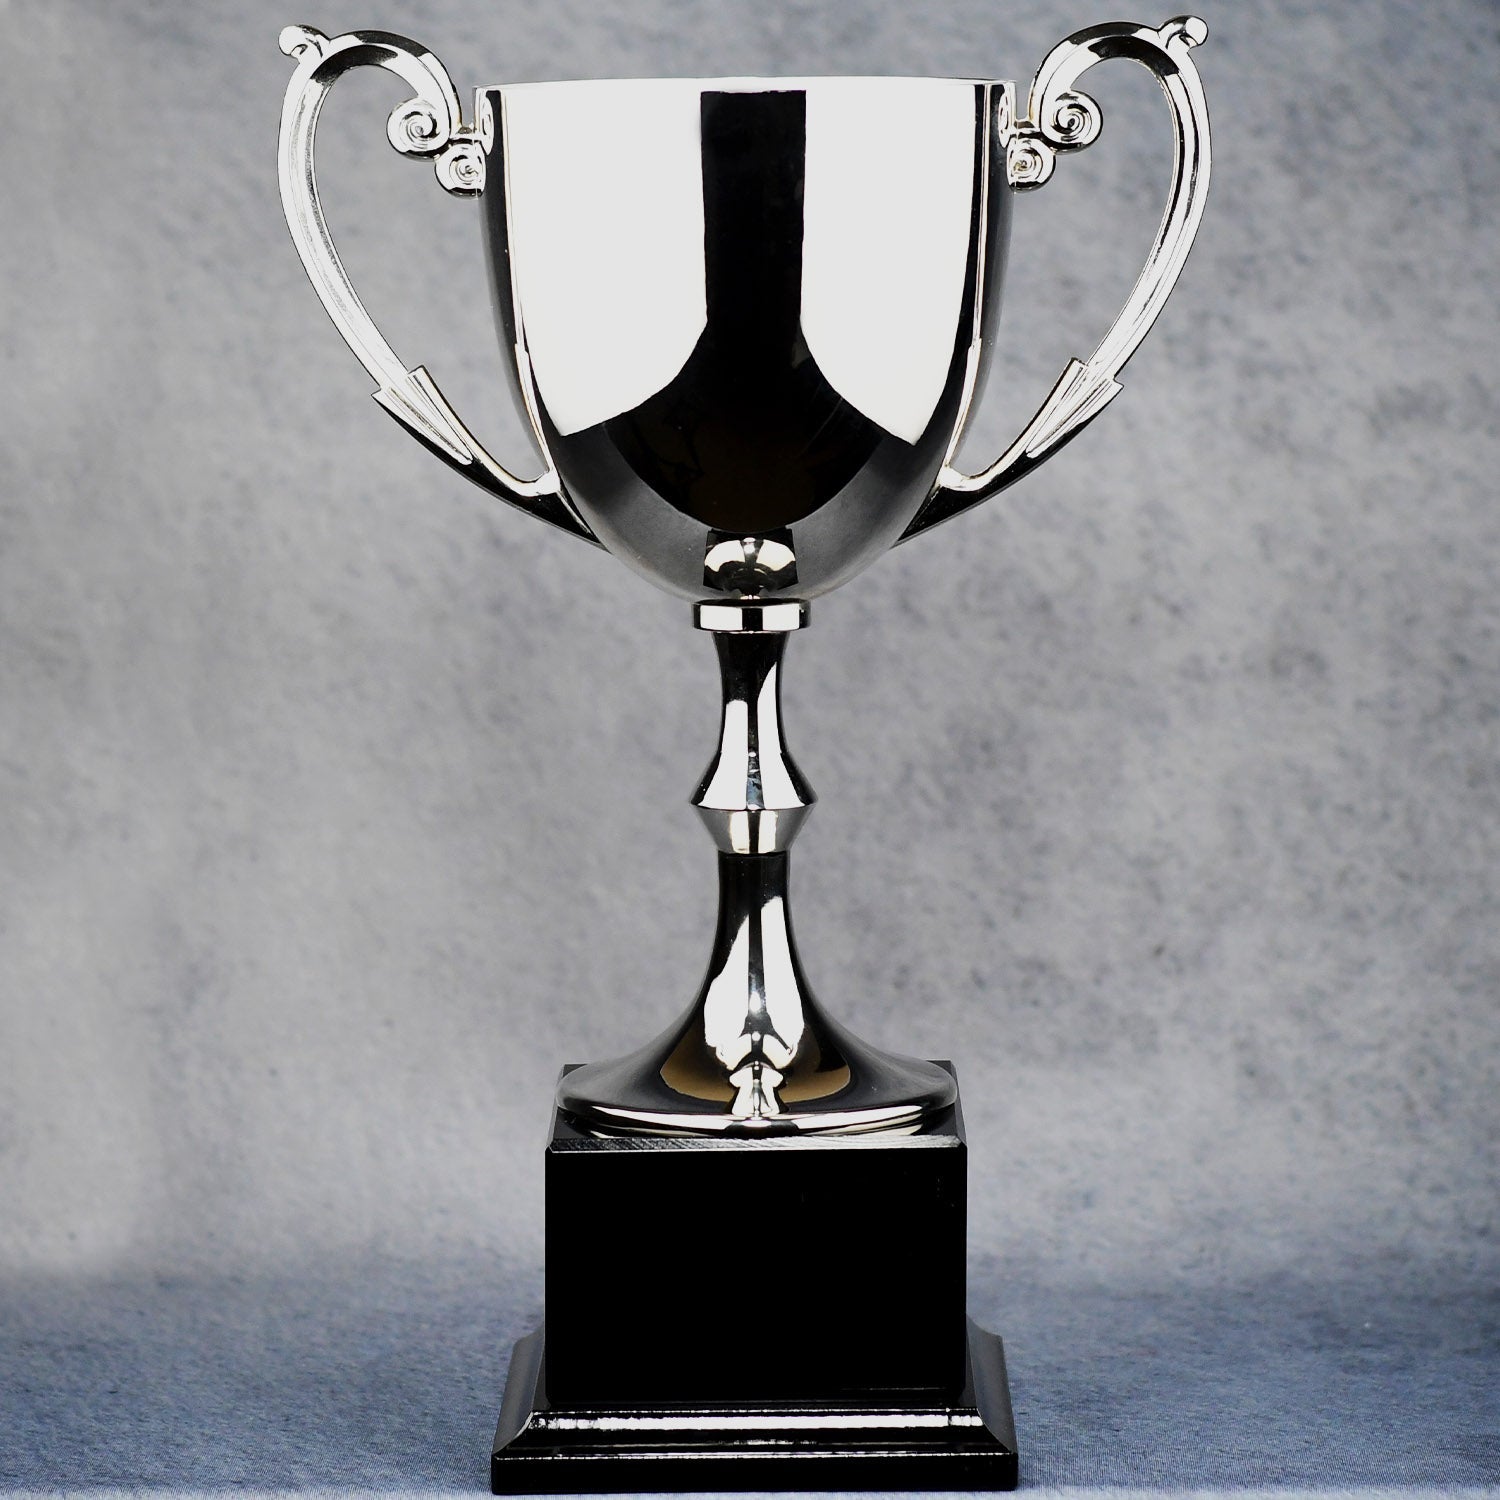 Silver Metal Cup On Black Marble Base | Alliance Awards LLC.